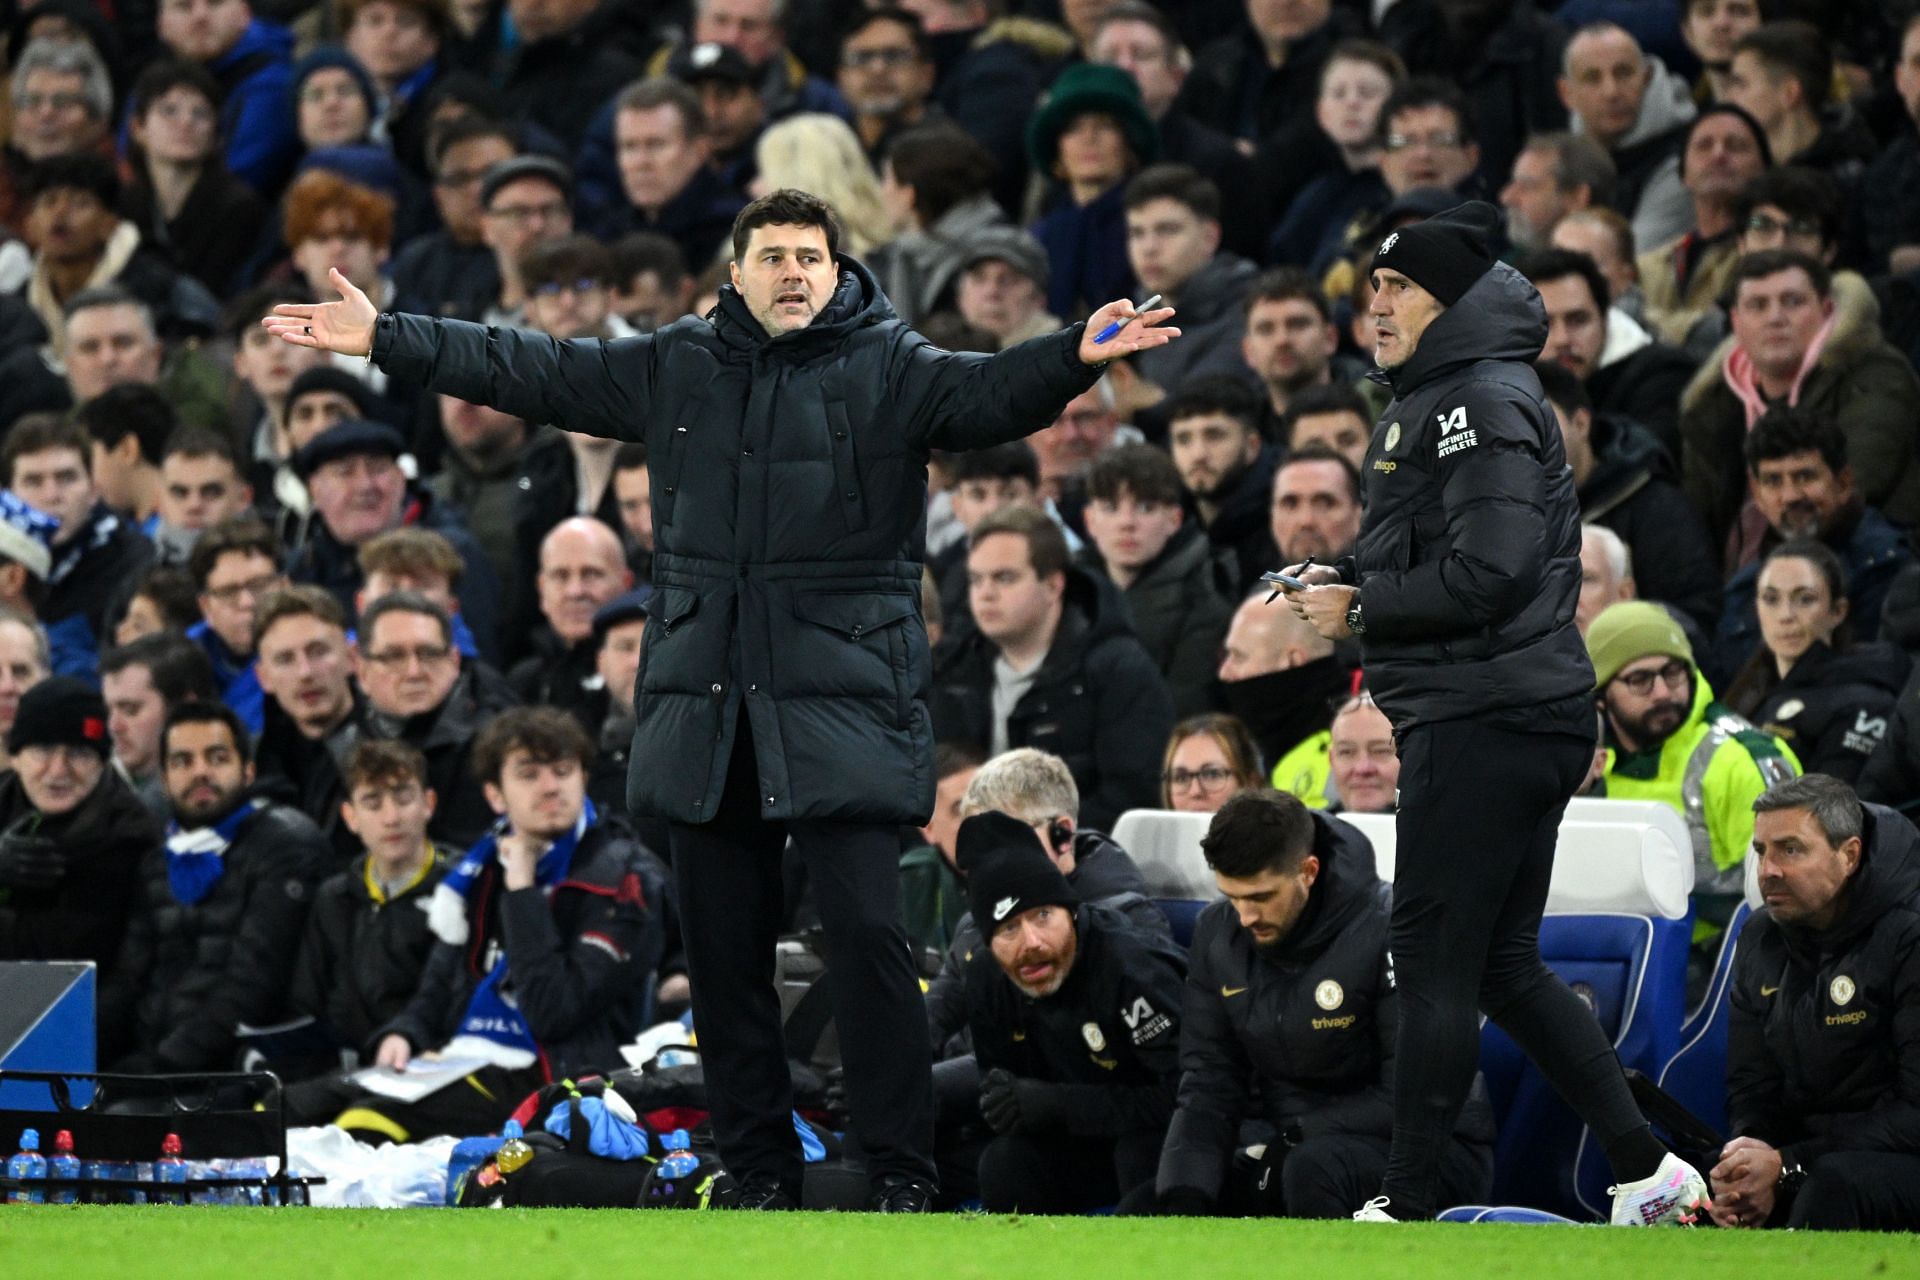 Mauricio Pochettino has regularly cut a frustrated figure on the touchline.